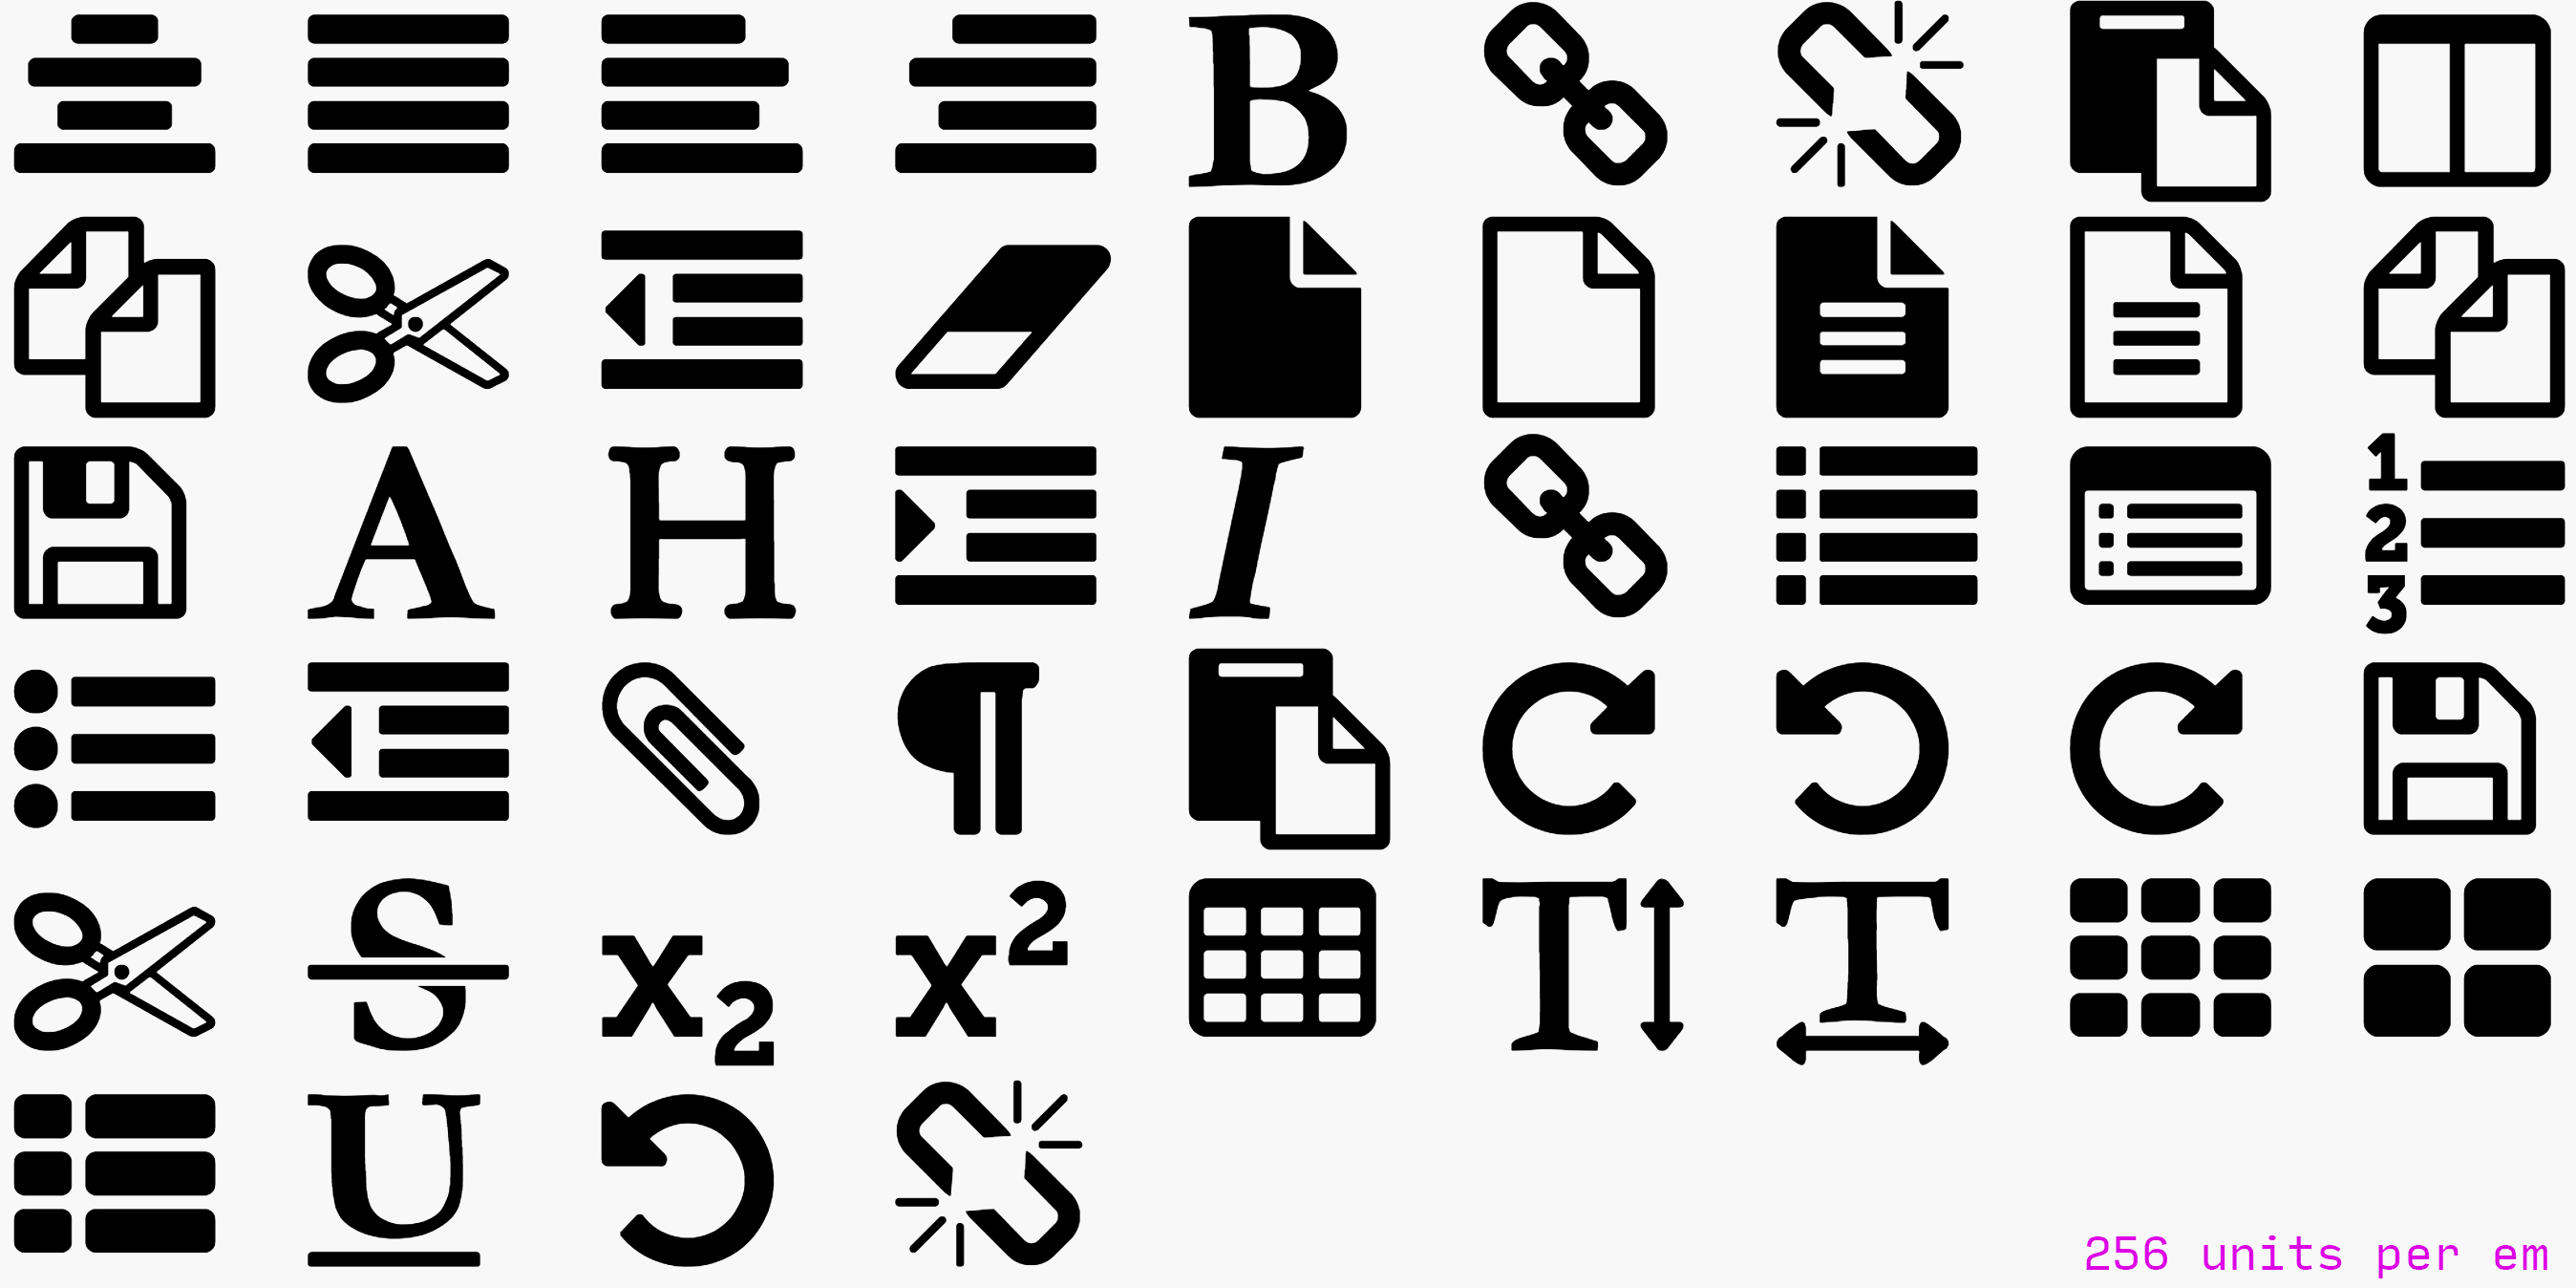 Sample of the Font Awesome icon set animating between 256 and 1792 unitsPerEm